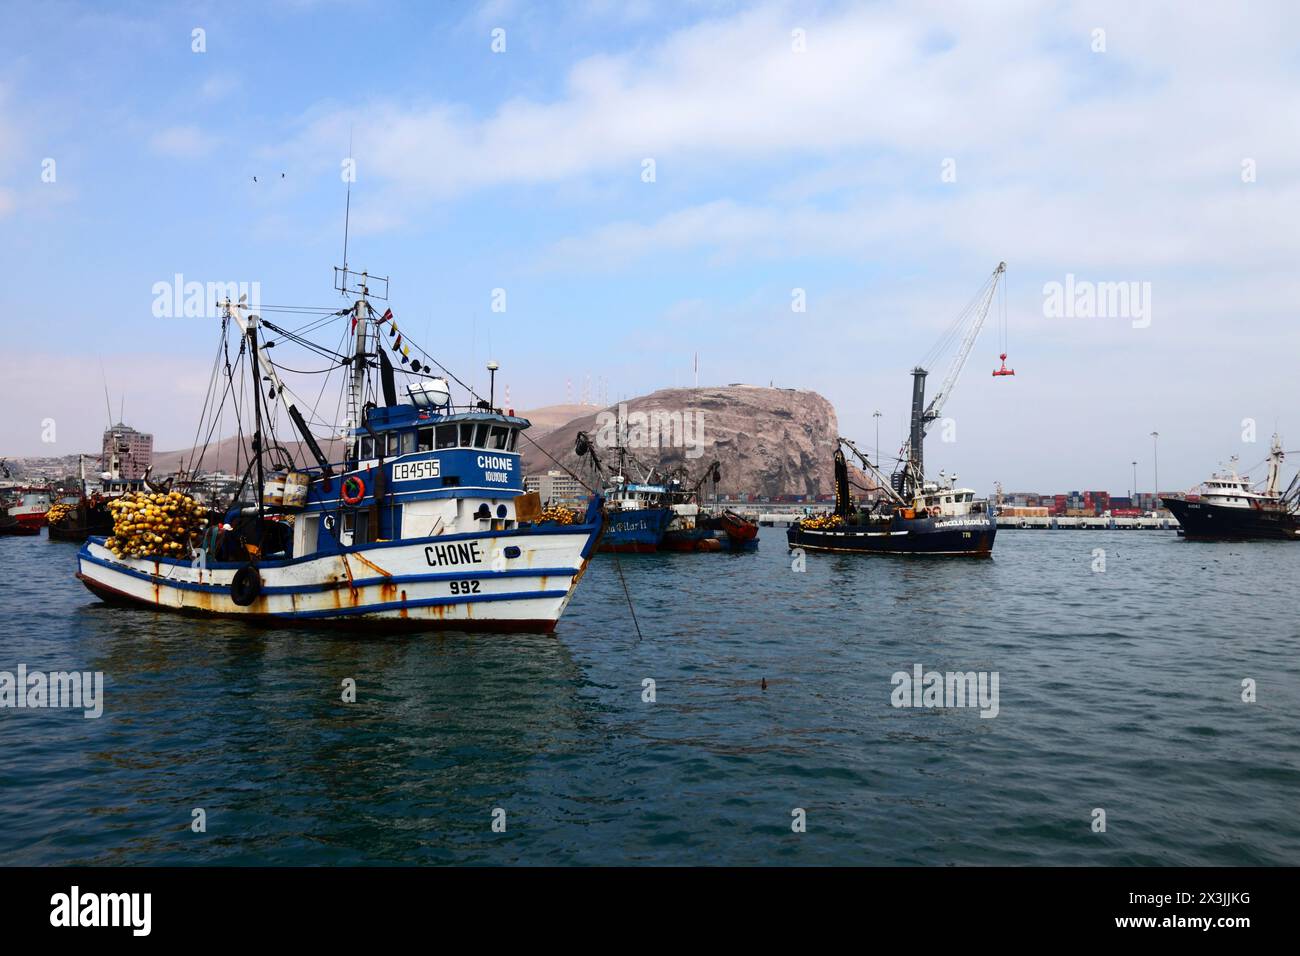 White Chine number 992 fishing trawler laden with equipment moored in port, El Morro headland in background, Arica, Chile Stock Photo